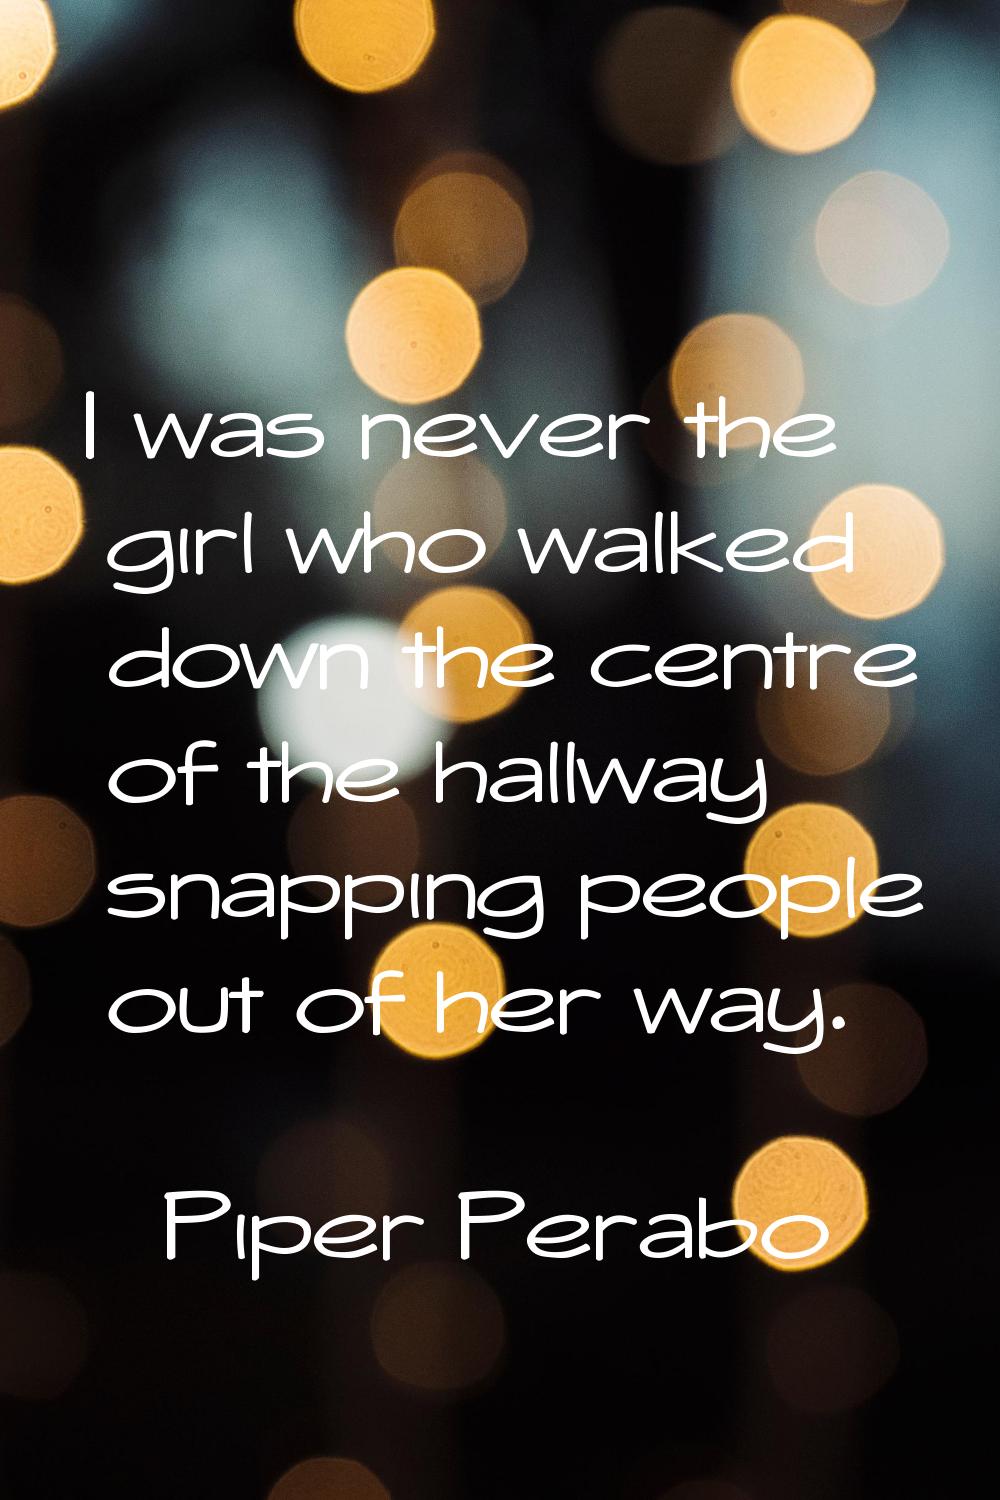 I was never the girl who walked down the centre of the hallway snapping people out of her way.